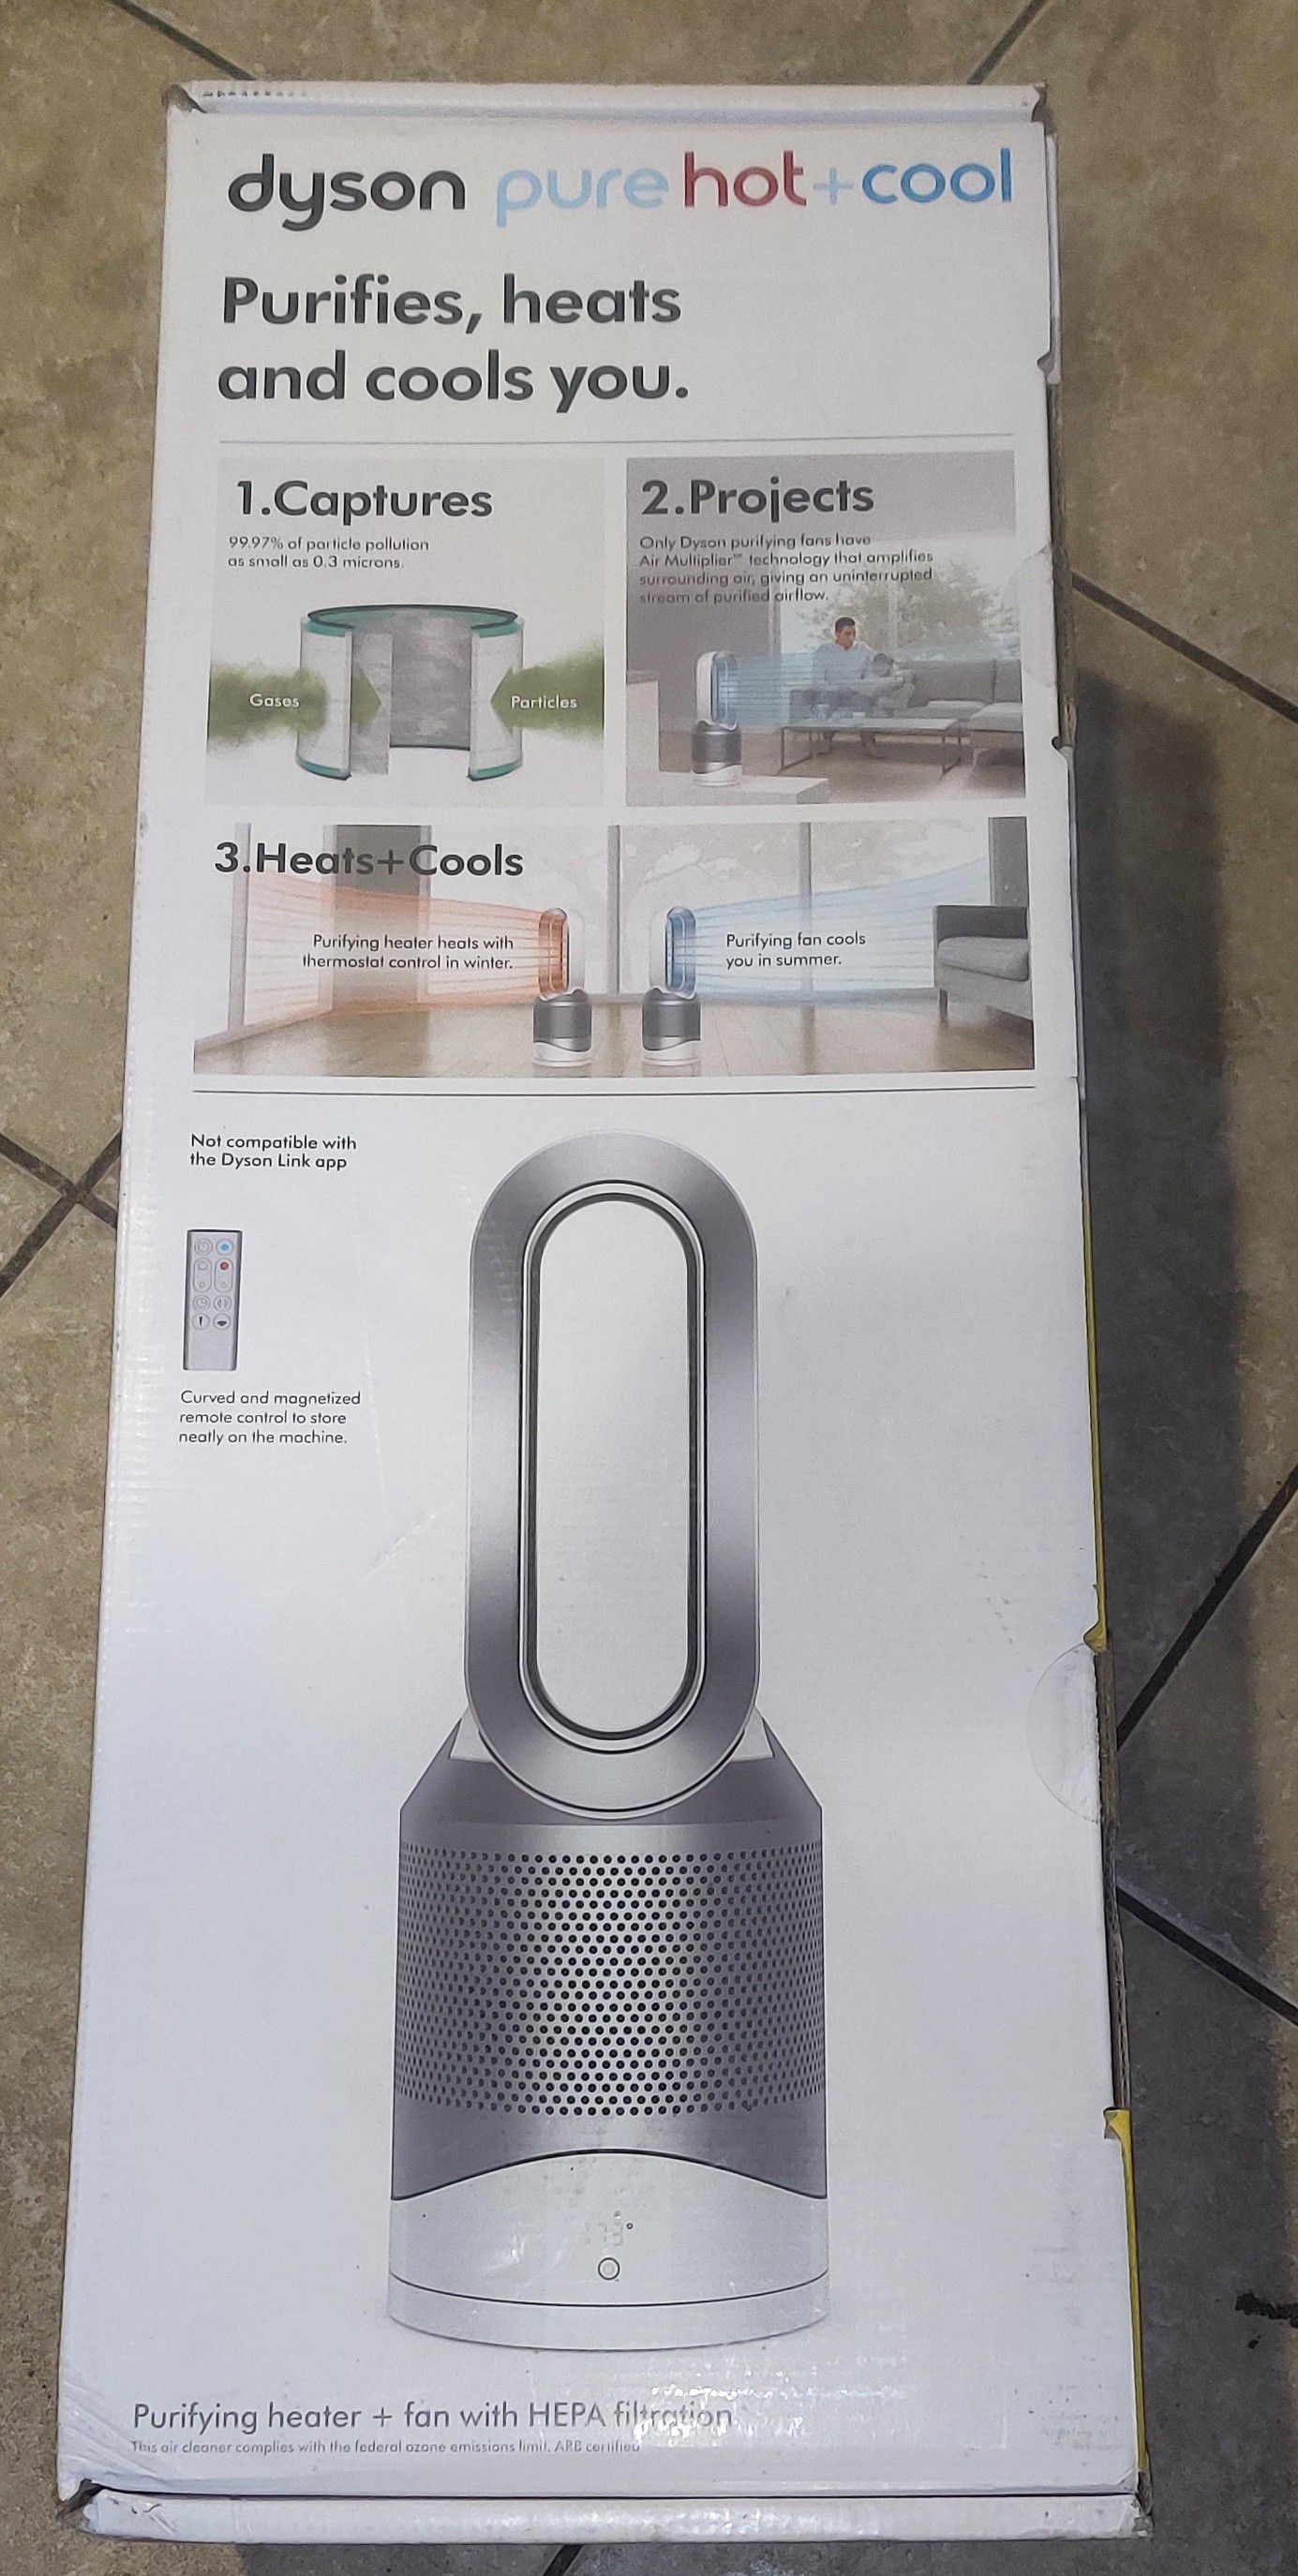 Dyson hp01 pure hot and cold Hippa air filter, cooling fan and heater